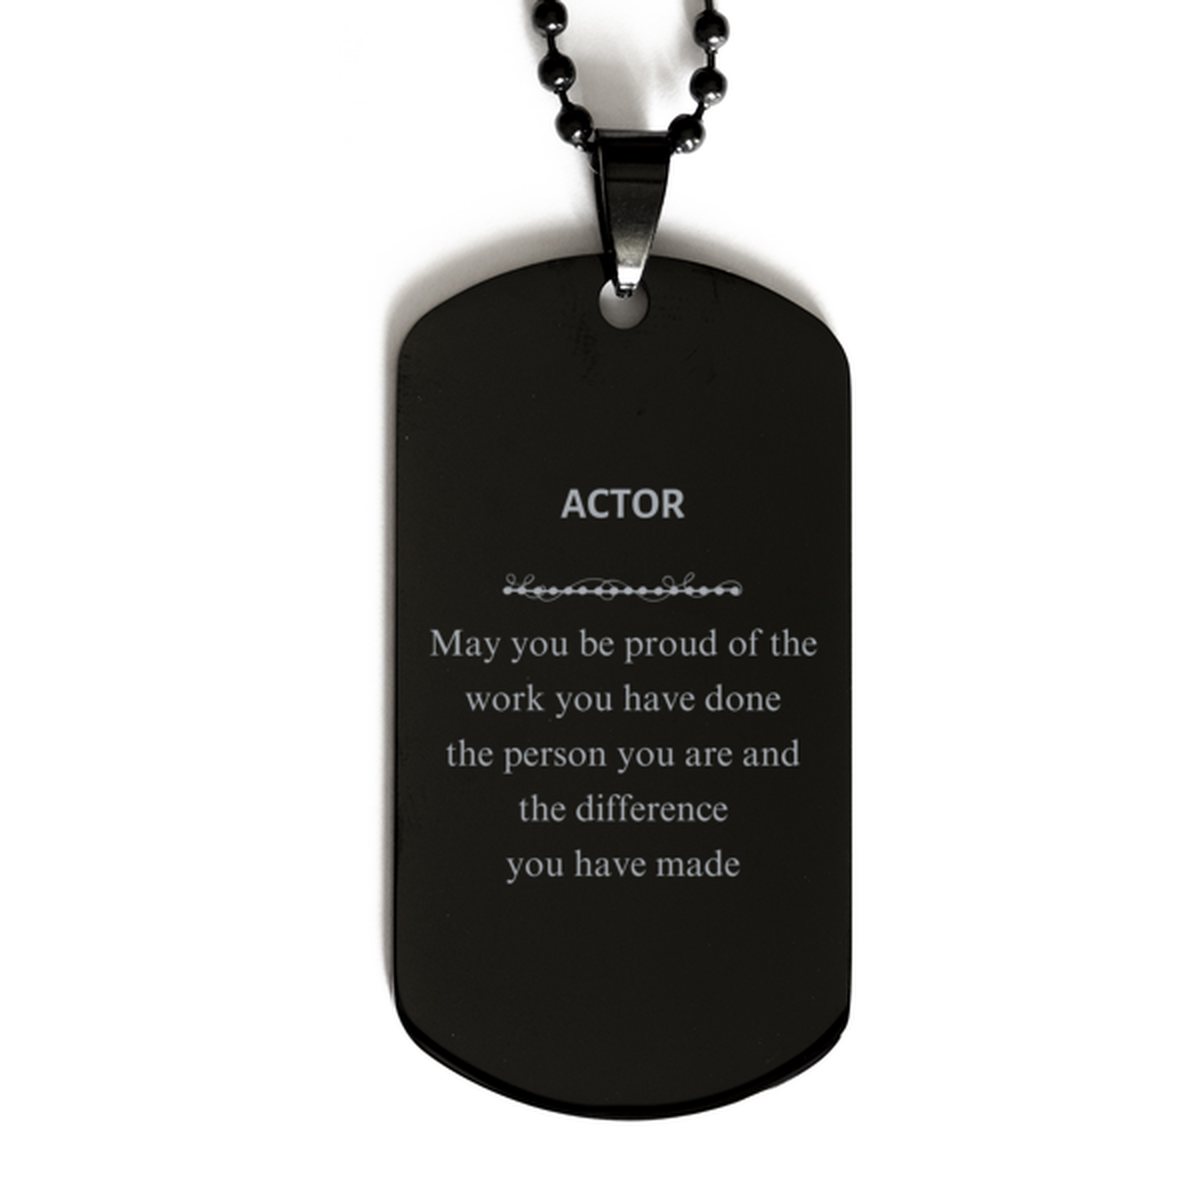 Actor May you be proud of the work you have done, Retirement Actor Black Dog Tag for Colleague Appreciation Gifts Amazing for Actor